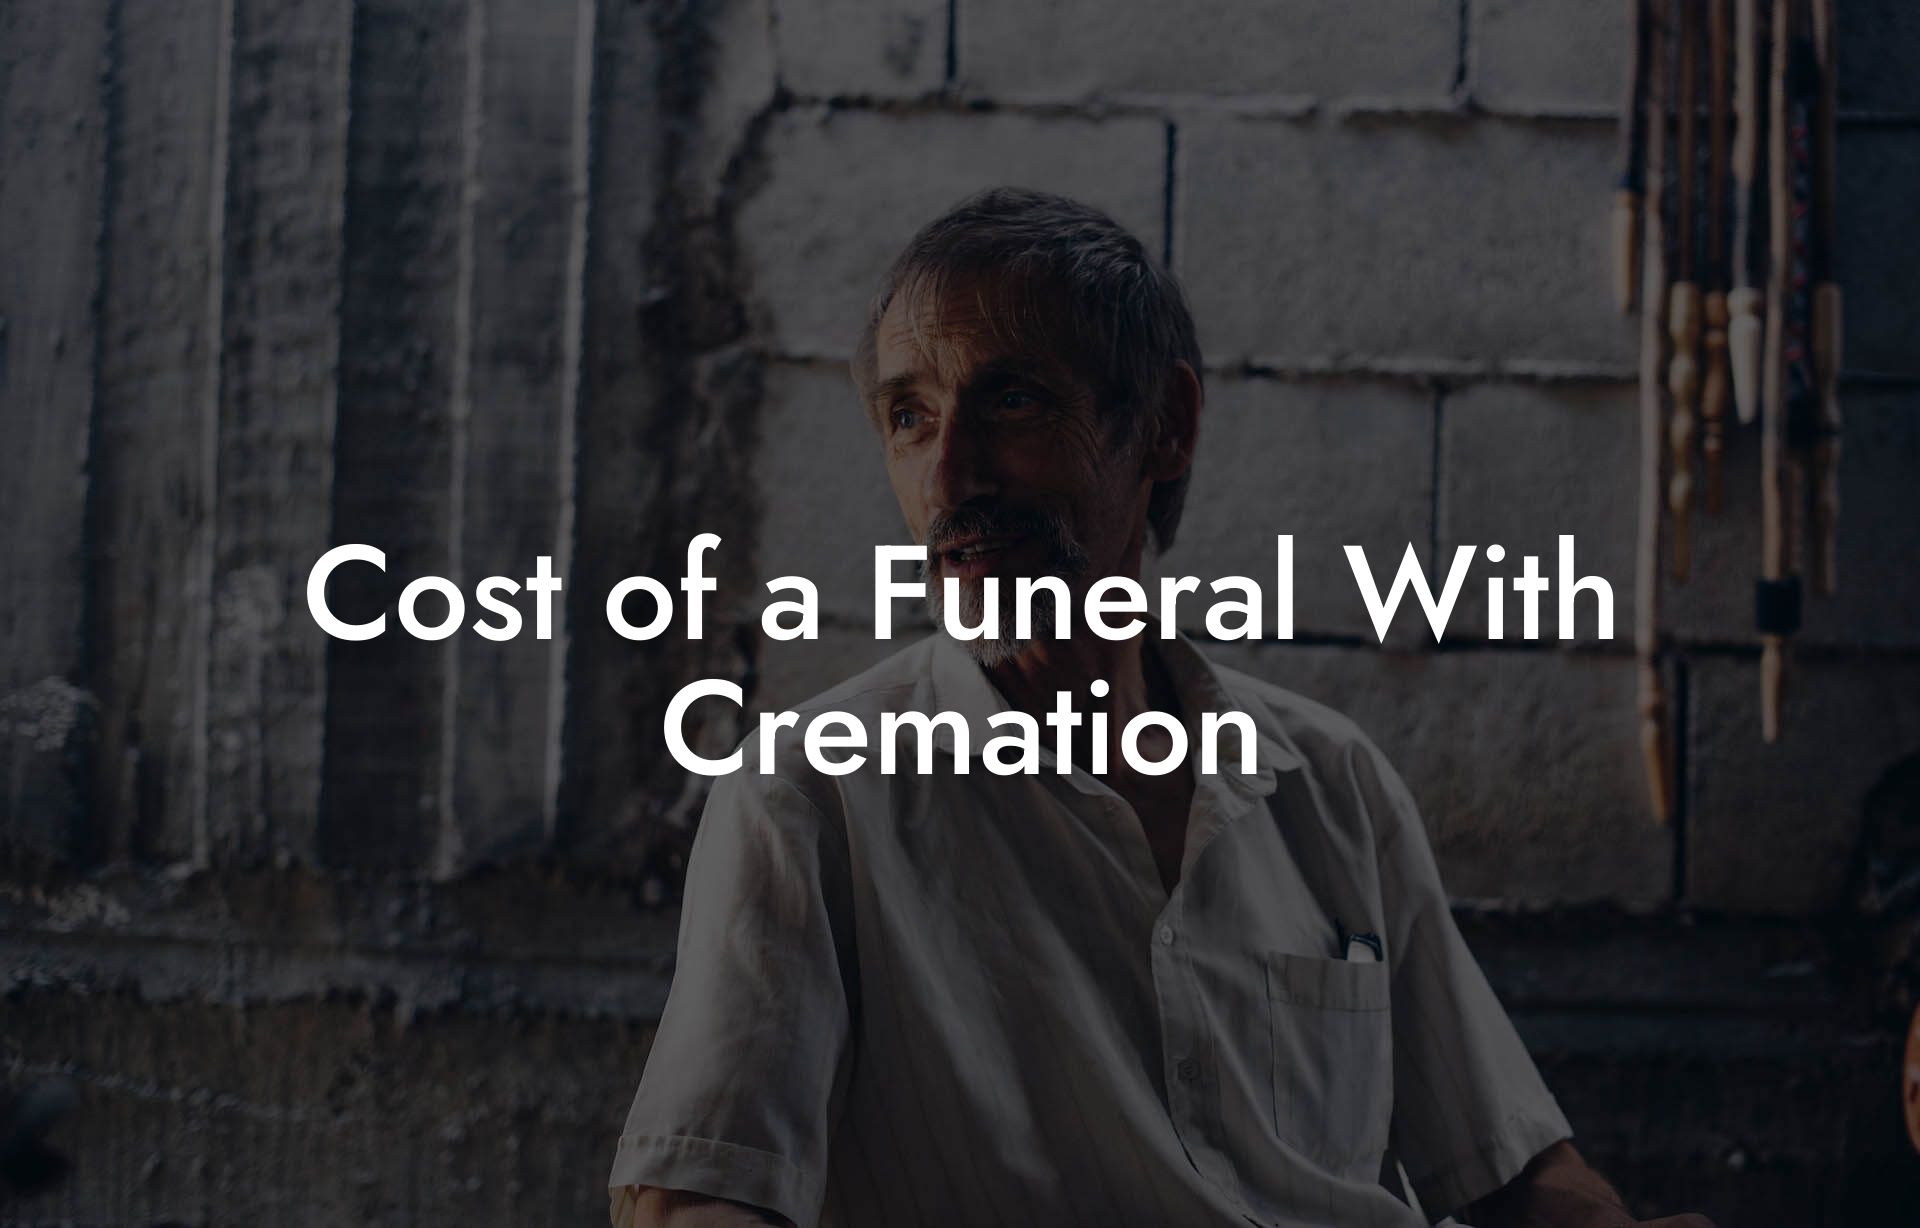 Cost of a Funeral With Cremation